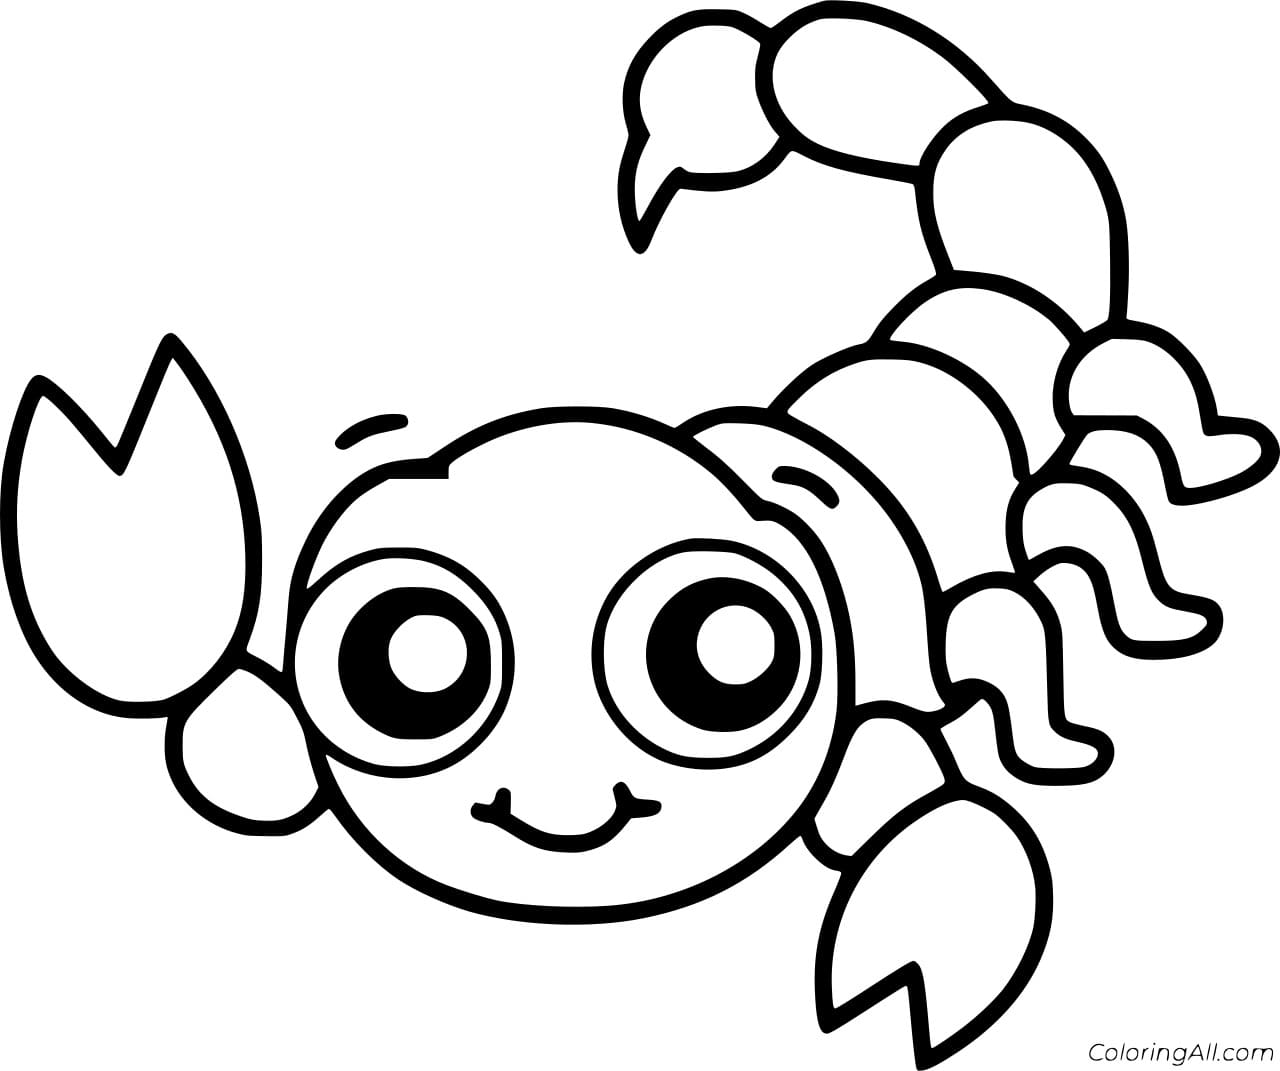 Cute Scorpion Free Printable Coloring Page